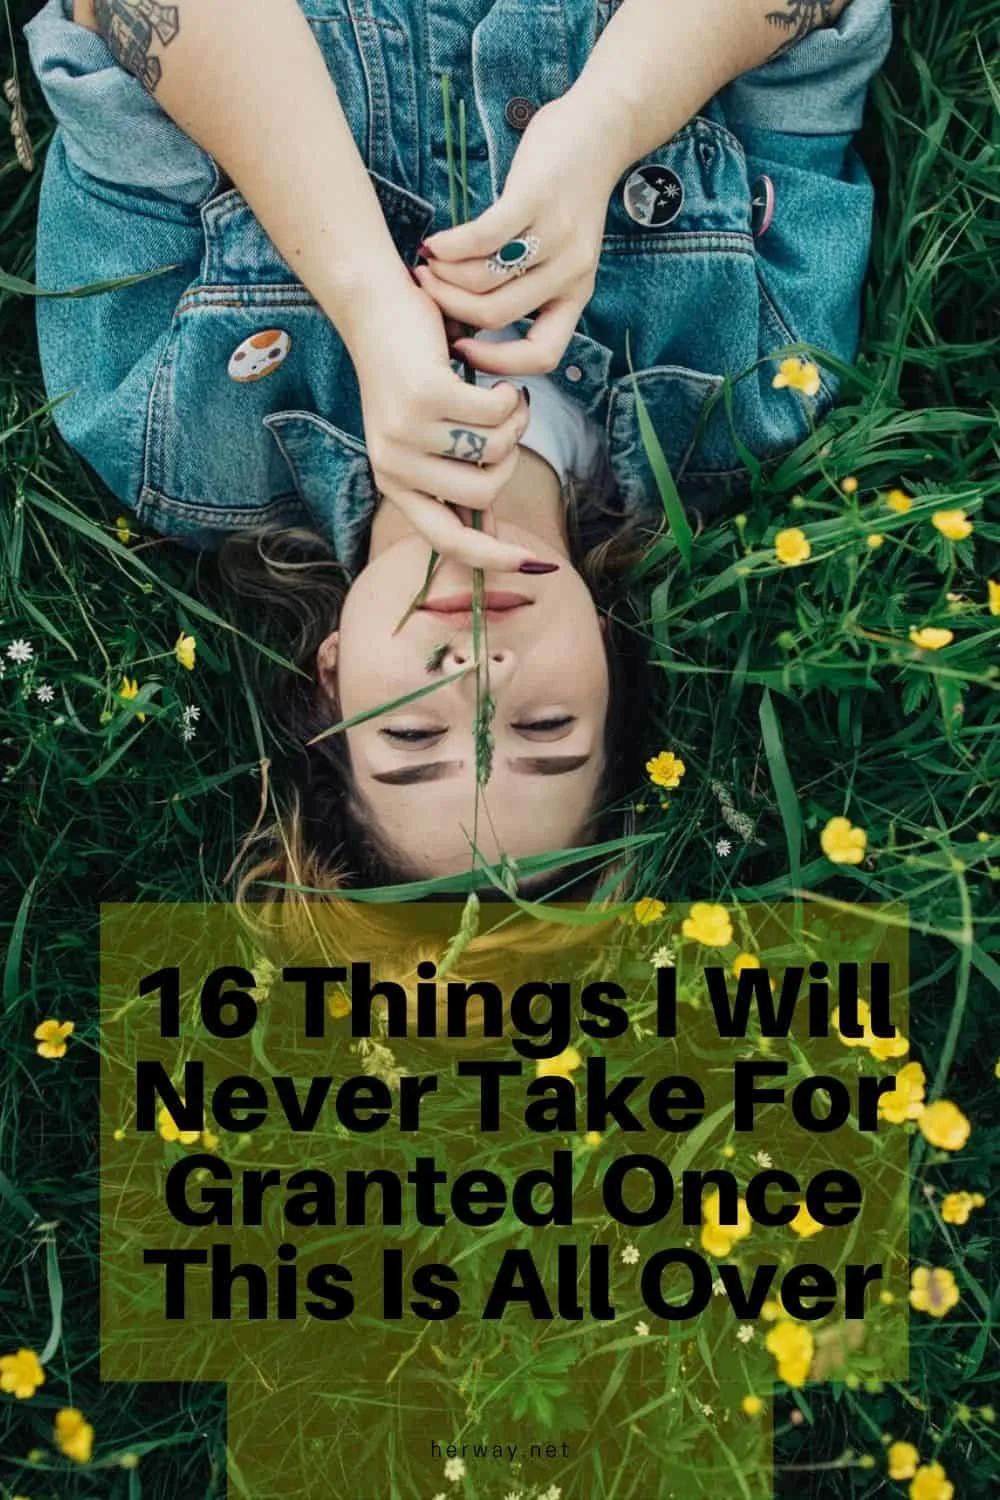 16 Things I Will Never Take For Granted Once This Is All Over